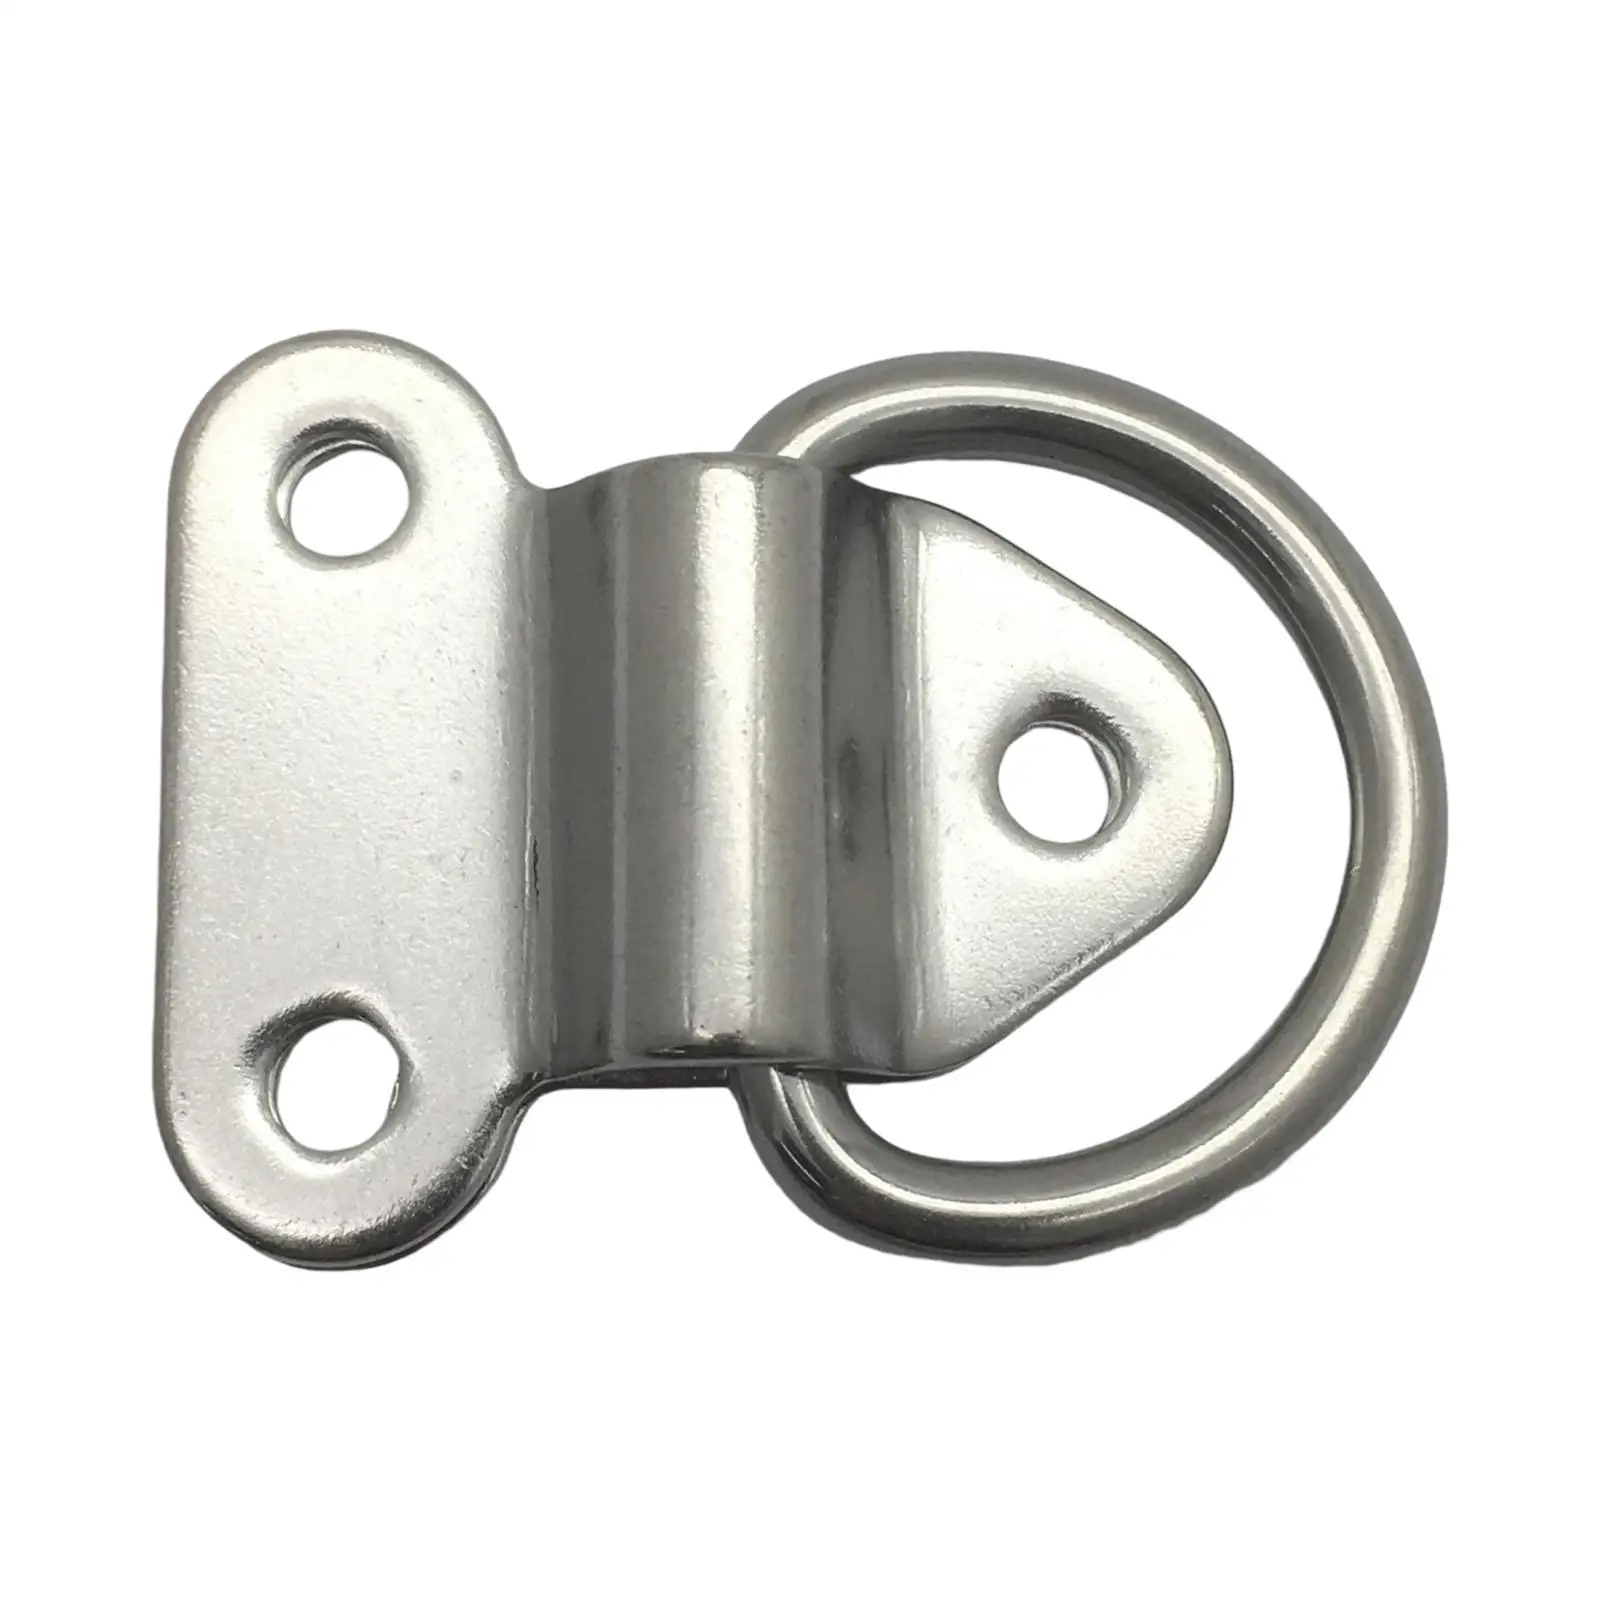 Folding Deck Pad Eyes Lashing D Ring Handle Stainless Steel Universal Heavy Duty Pull Ring for Ship Trailer Boats Truck